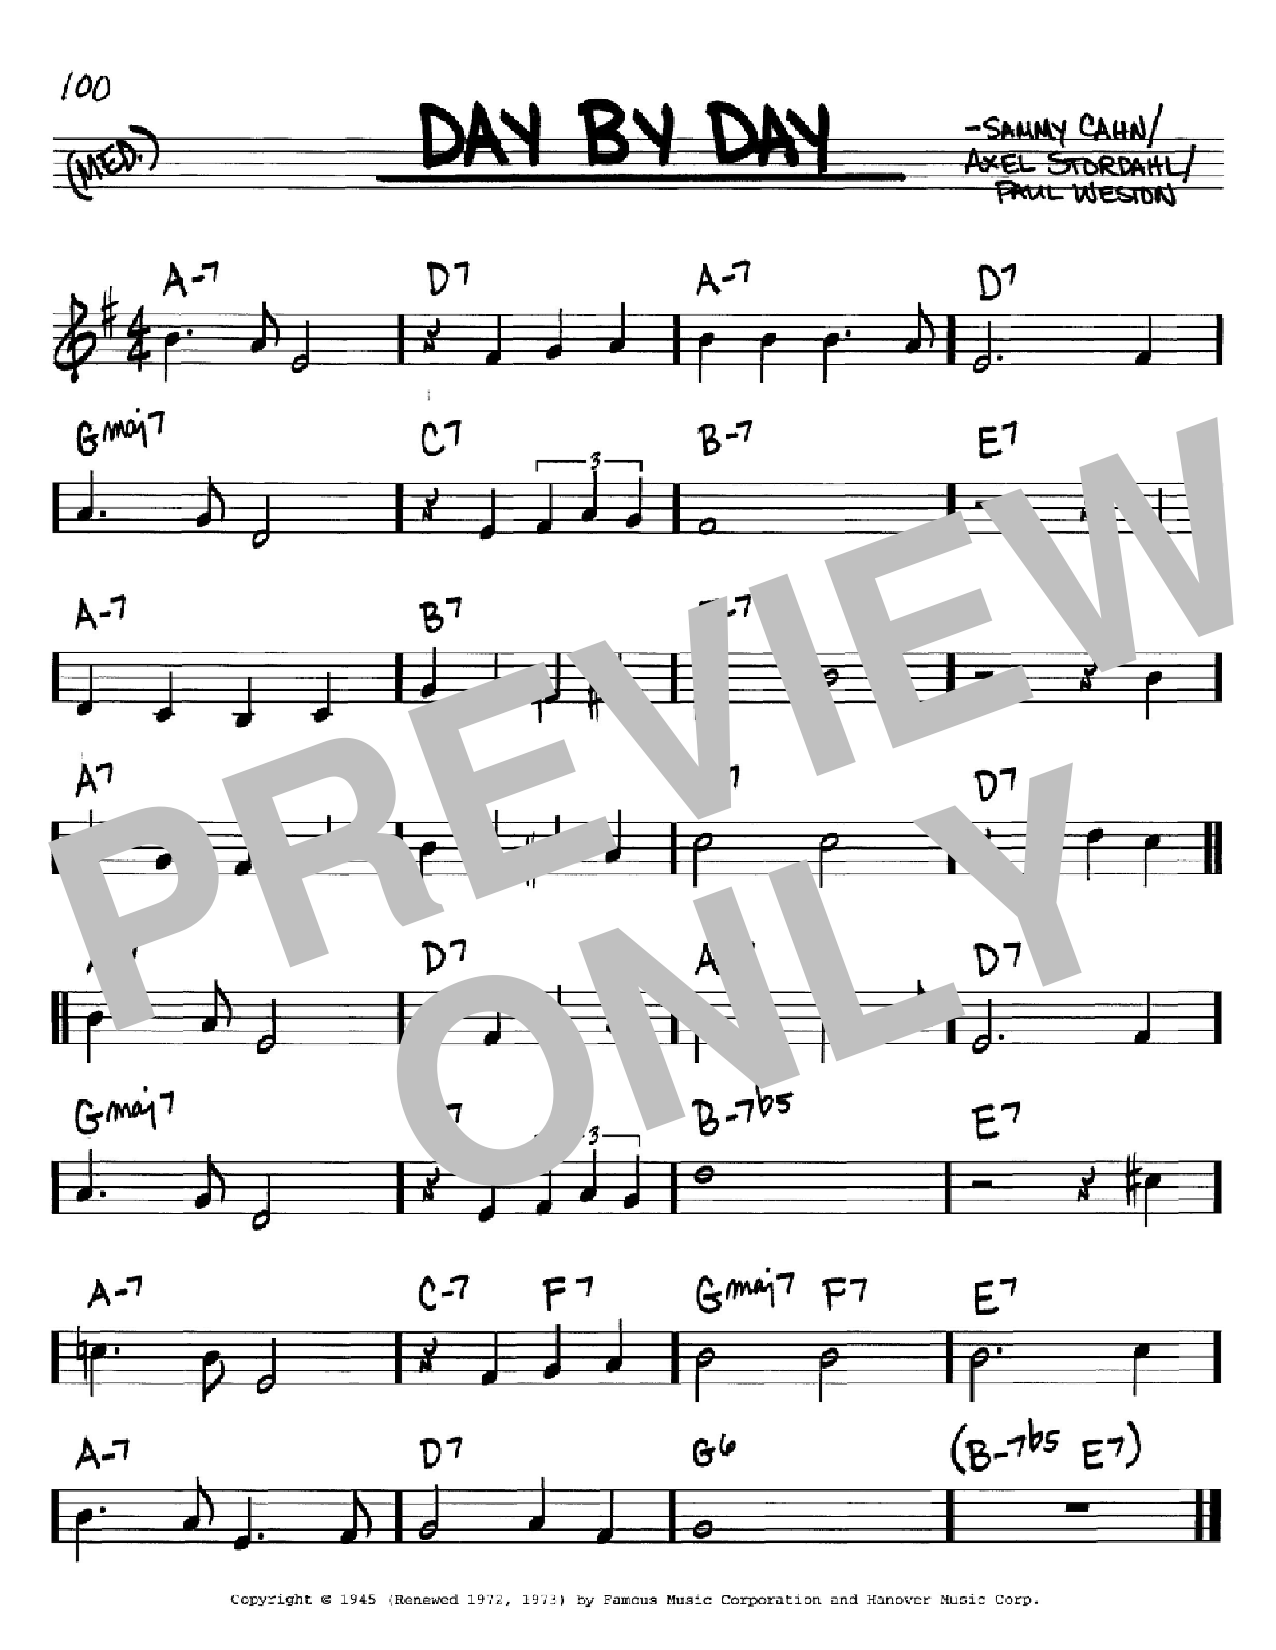 Sammy Cahn Day By Day sheet music preview music notes and score for Guitar Tab including 2 page(s)